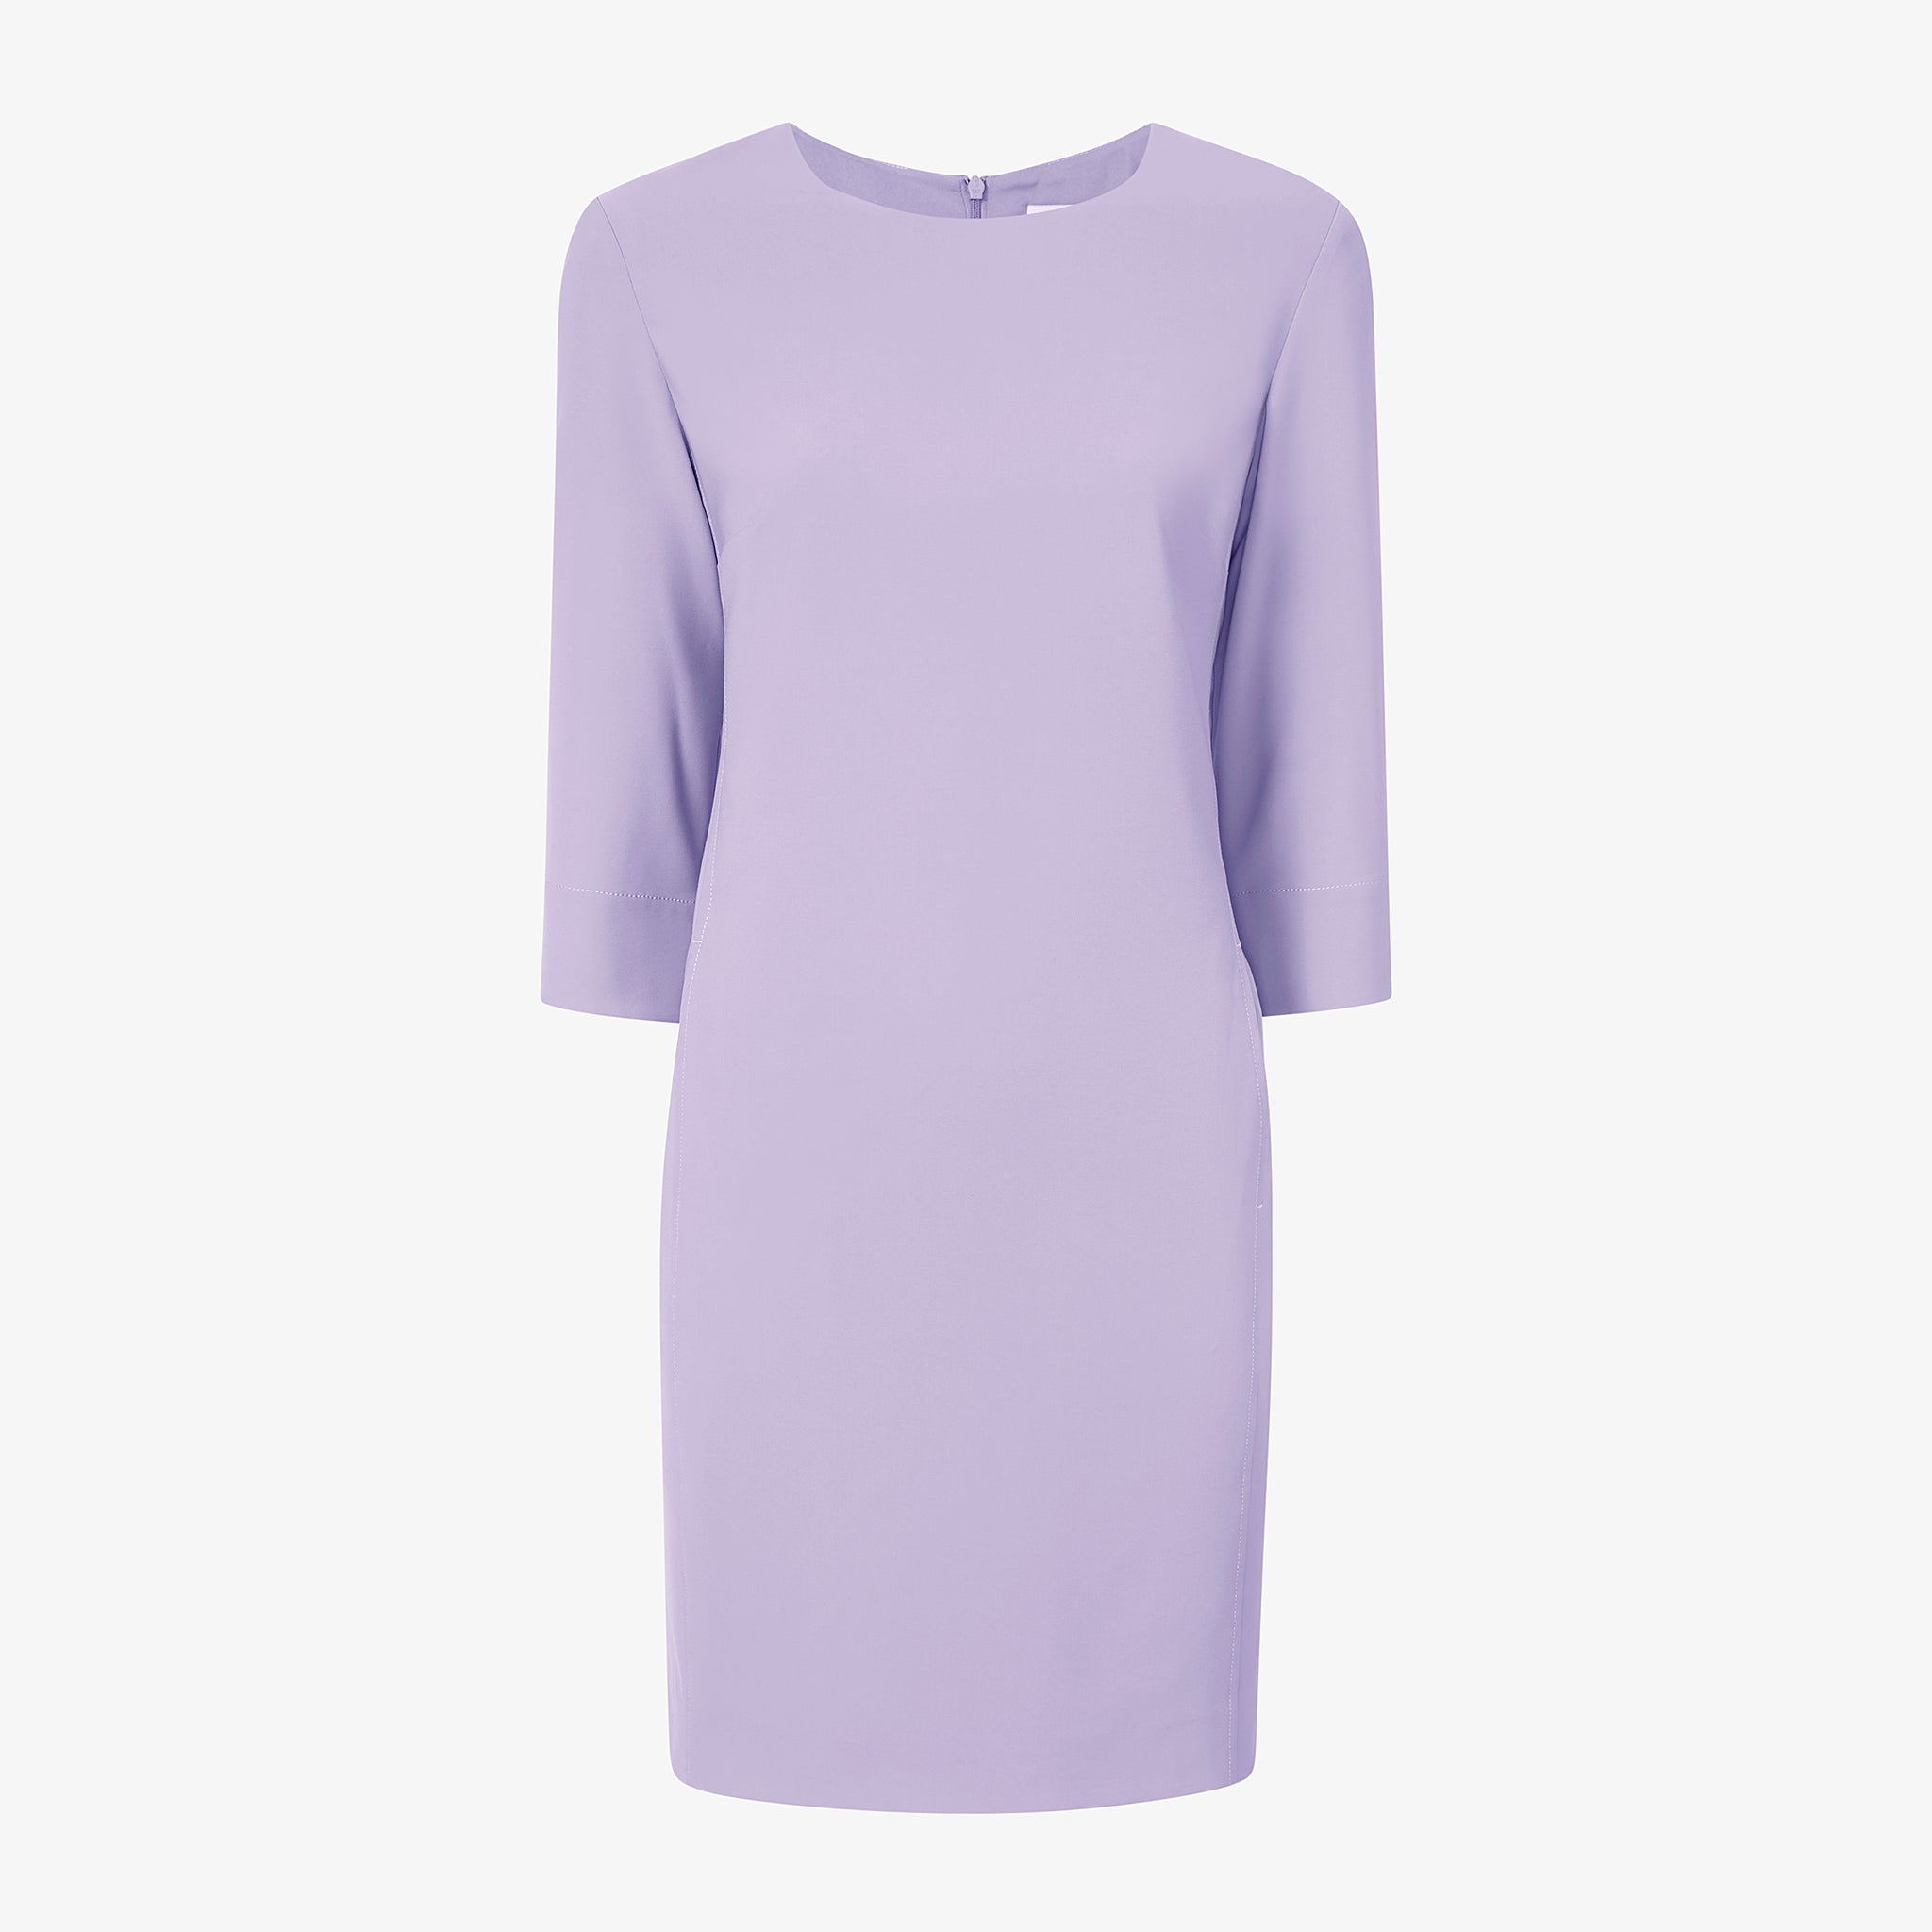 packshot image of the lancia dress in light orchid